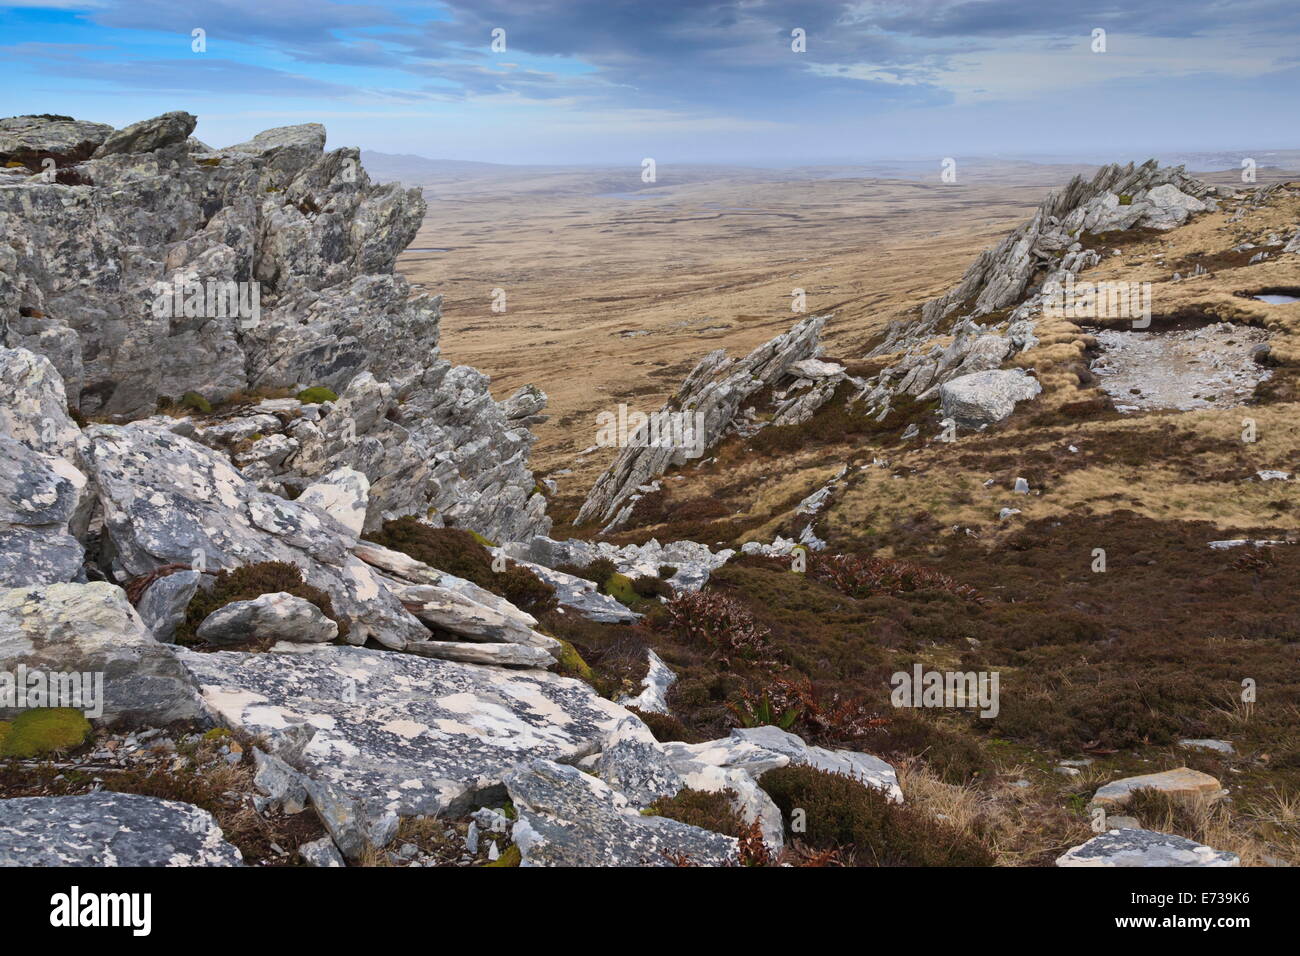 Exposed jagged rocks and distant view, Mount Longdon, East Falkland, Falkland Islands, South America Stock Photo